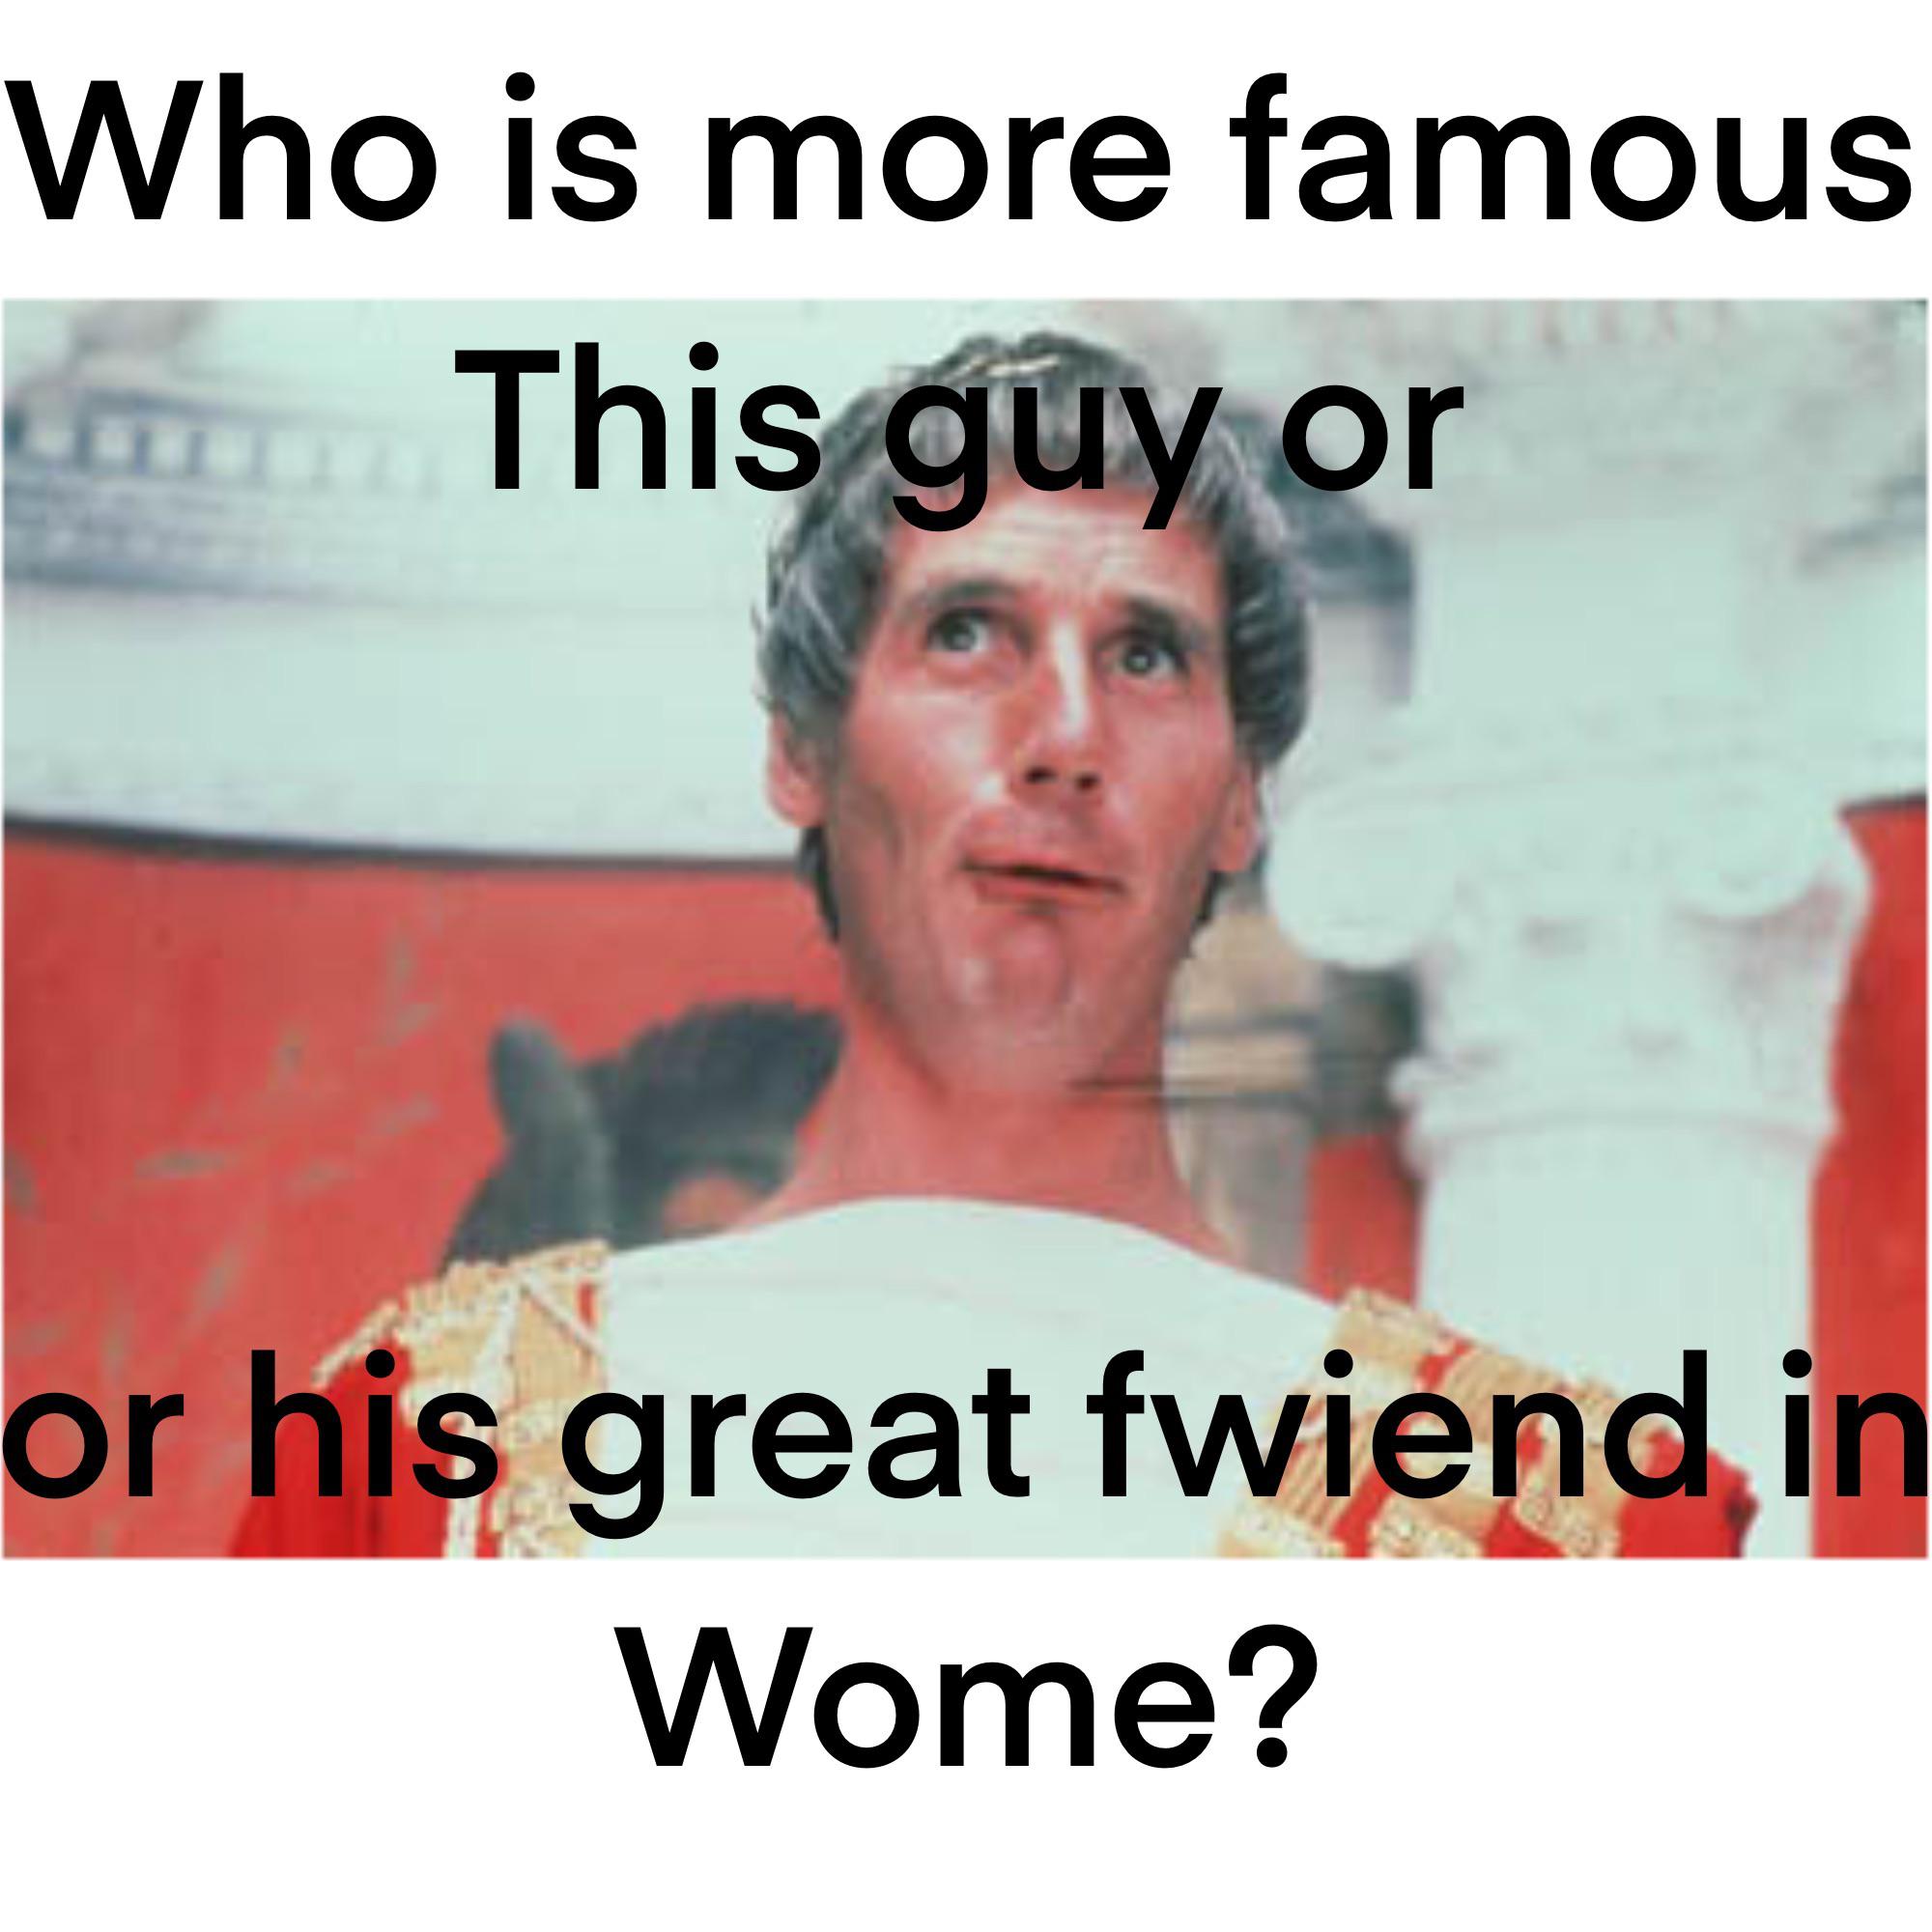 life of brian - Who is more famous This guy or or his great fwiend in Wome?